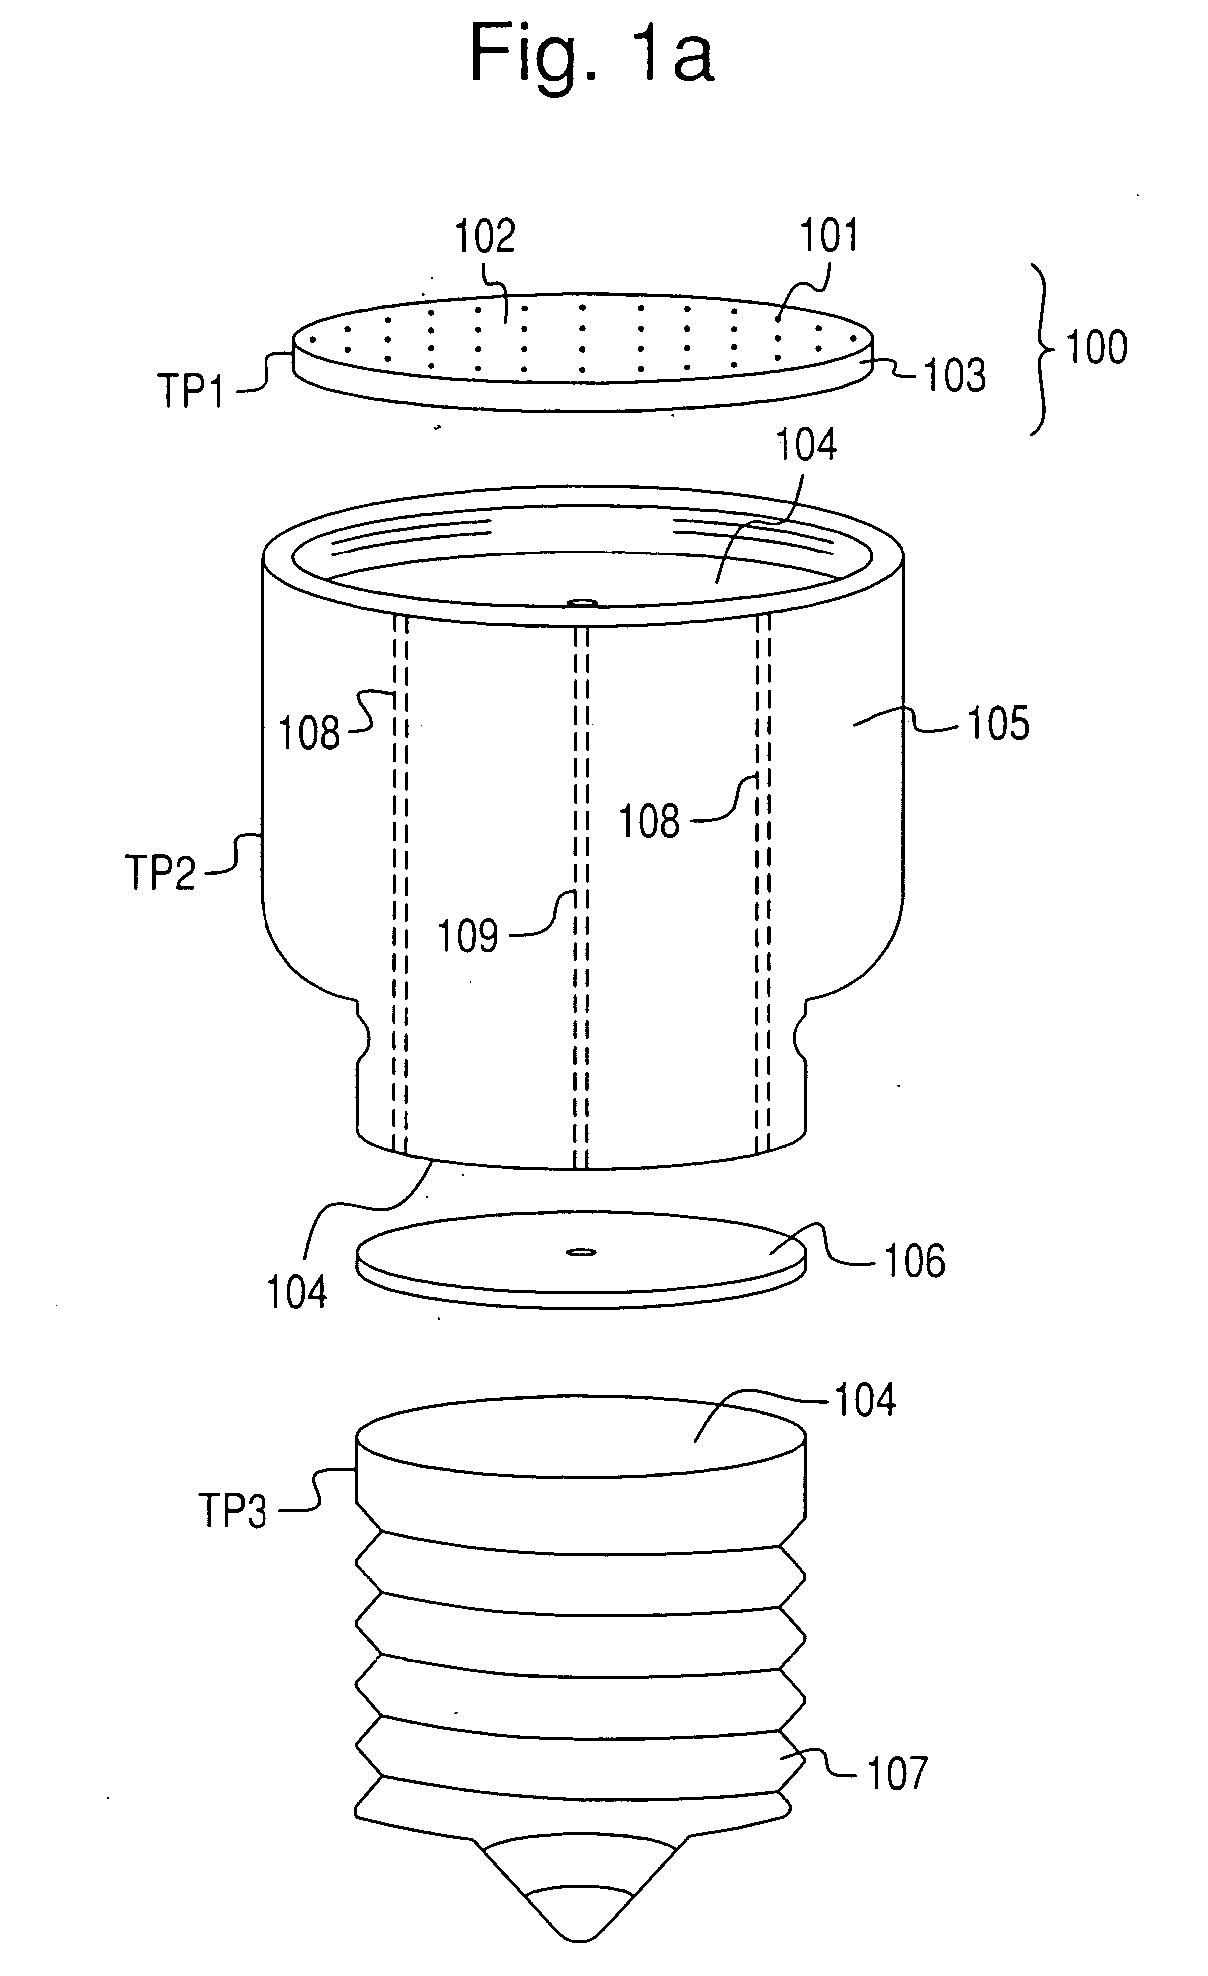 Solid state lighting device with improved thermal management, improved power management, adjustable intensity, and interchangable lenses